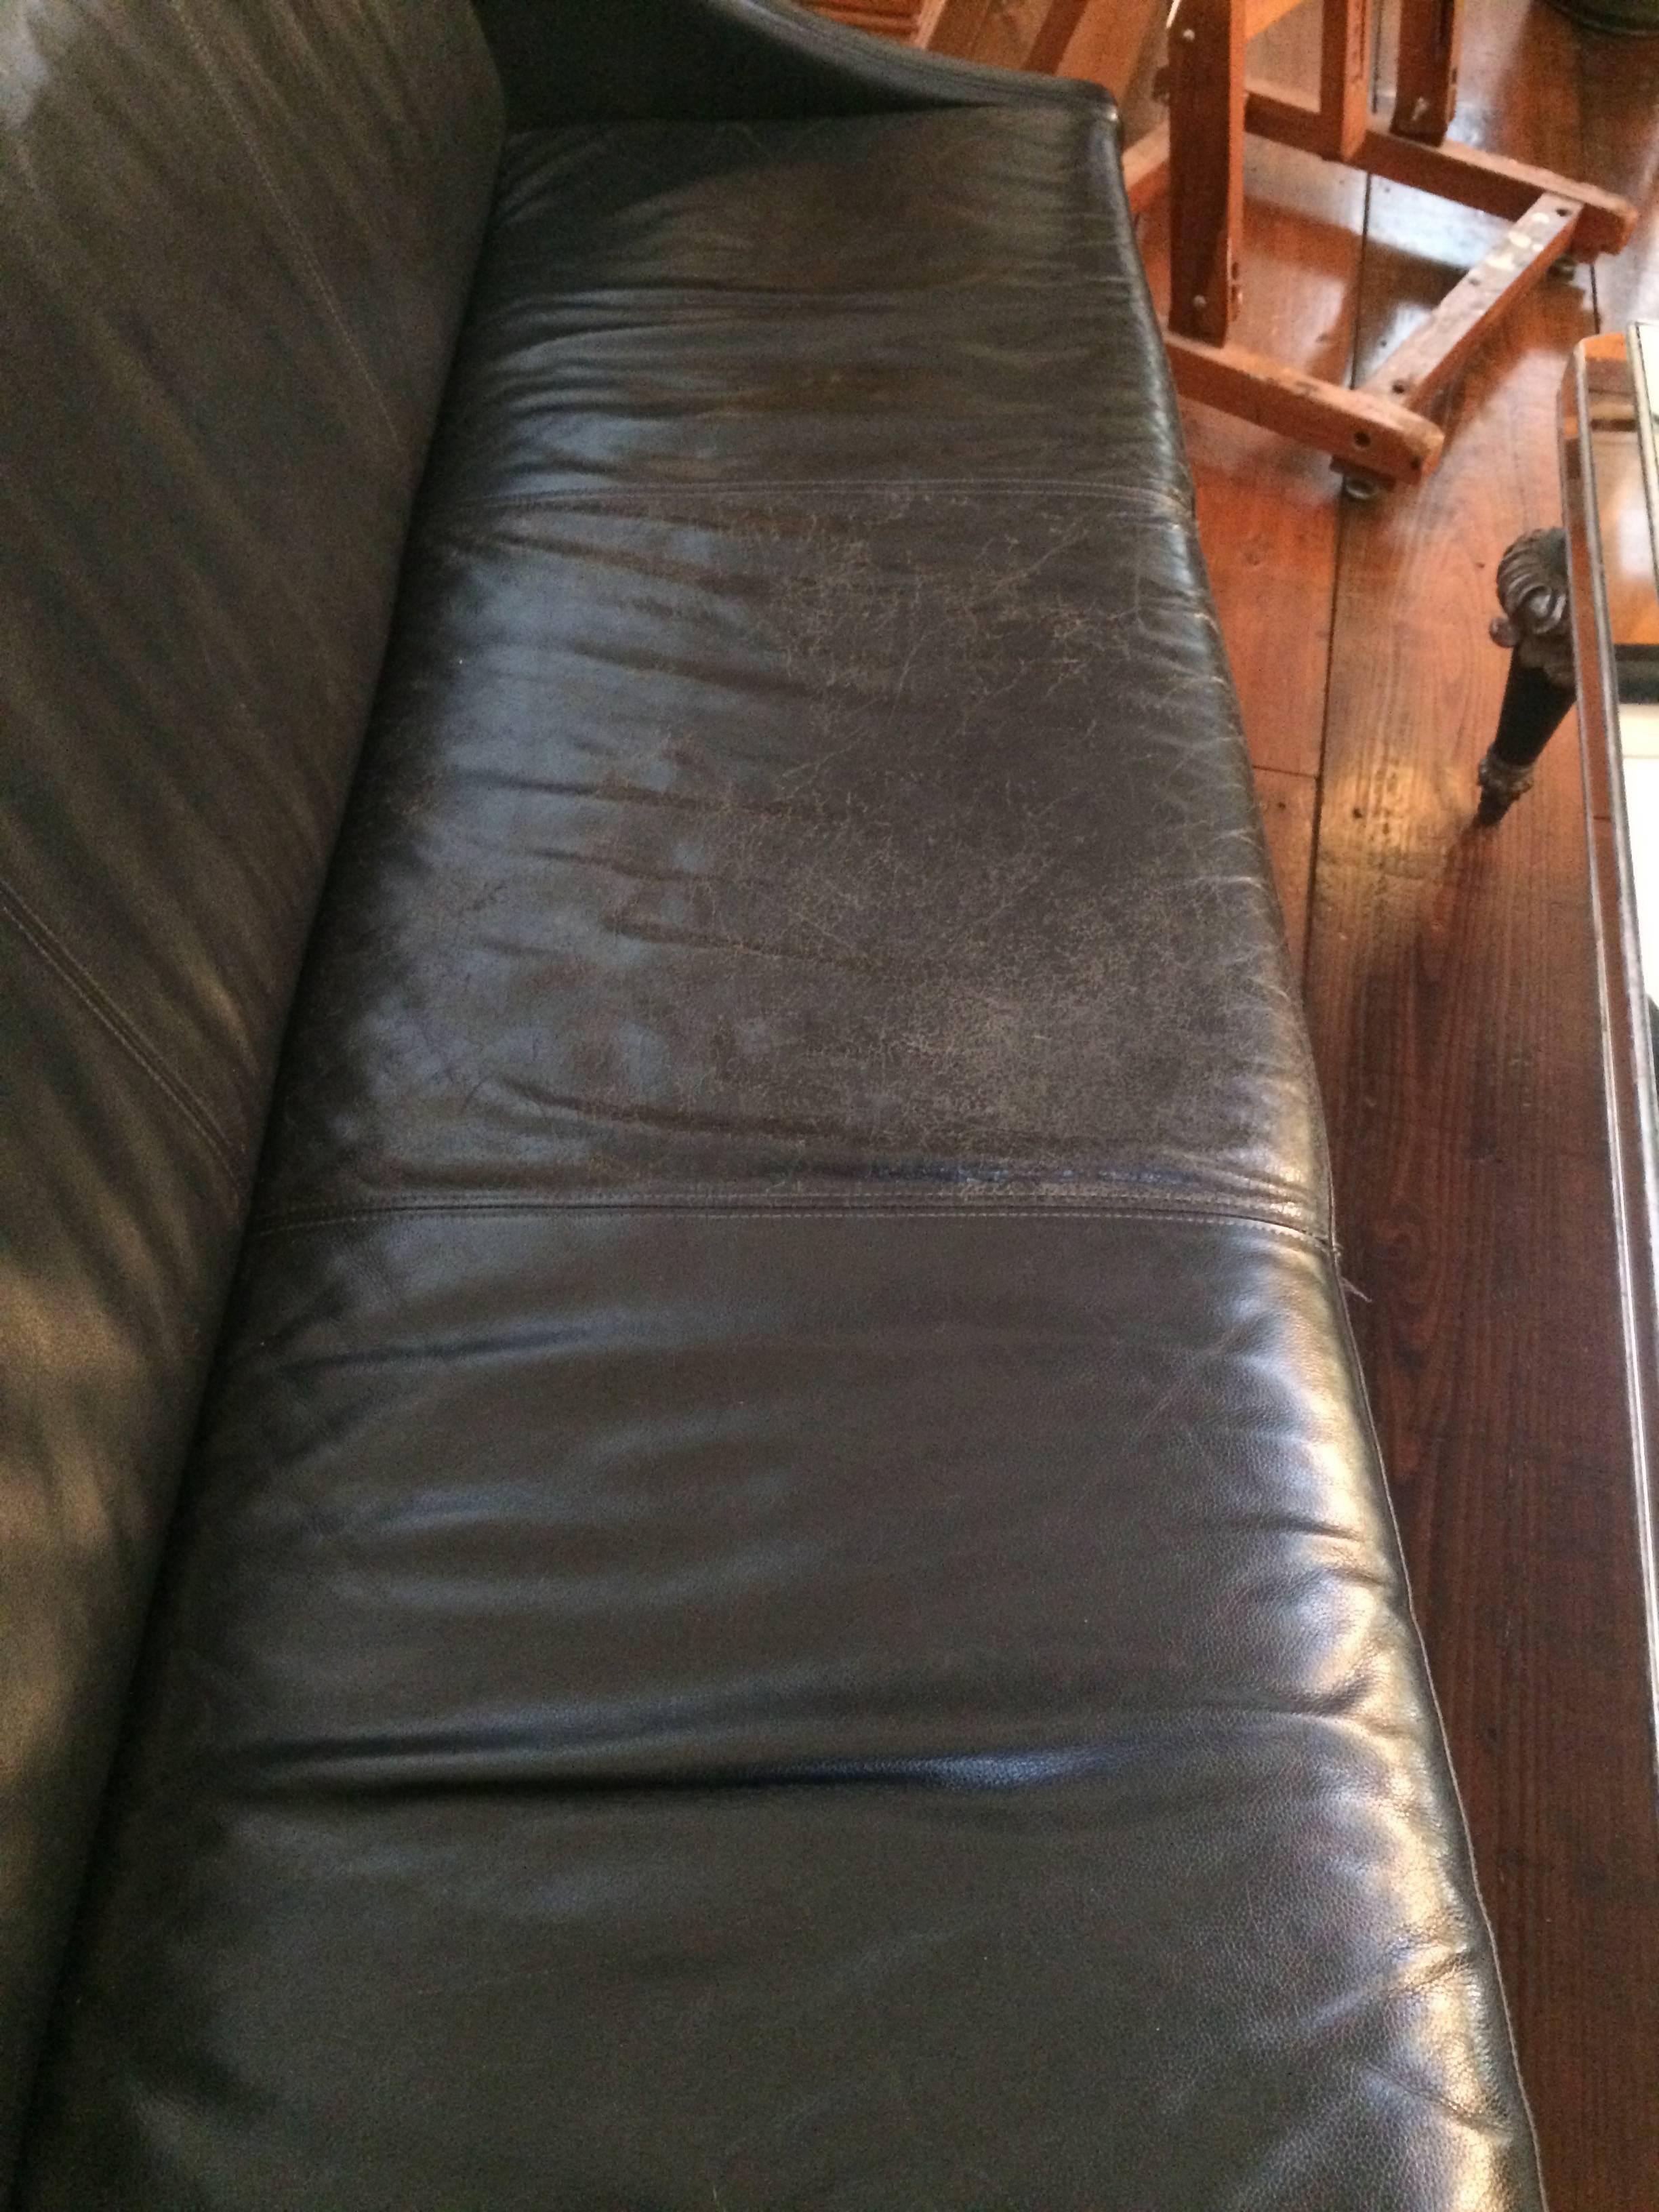 Sophisticated Men's Club Mid-Century Modern Black Leather Couch 2